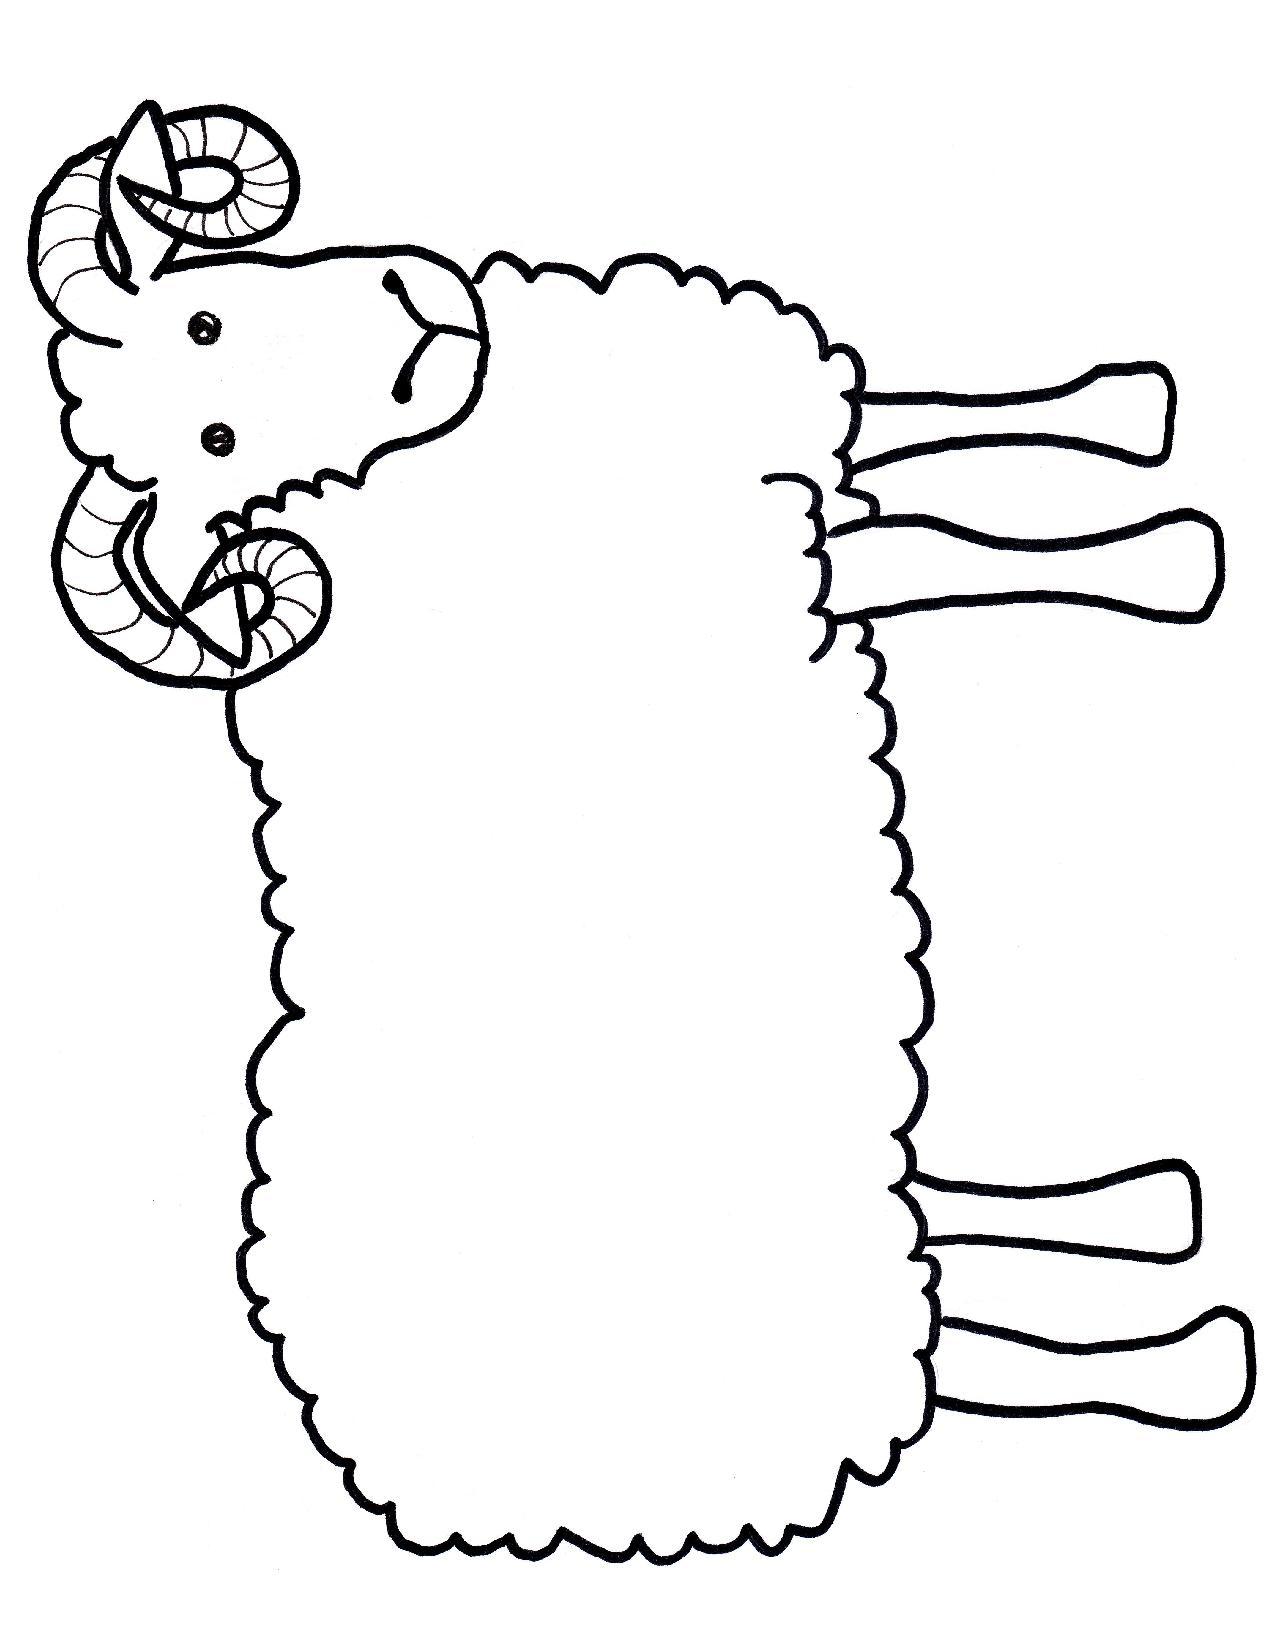 Sheep Craft Template | Jos Gandos Coloring Pages For Kids